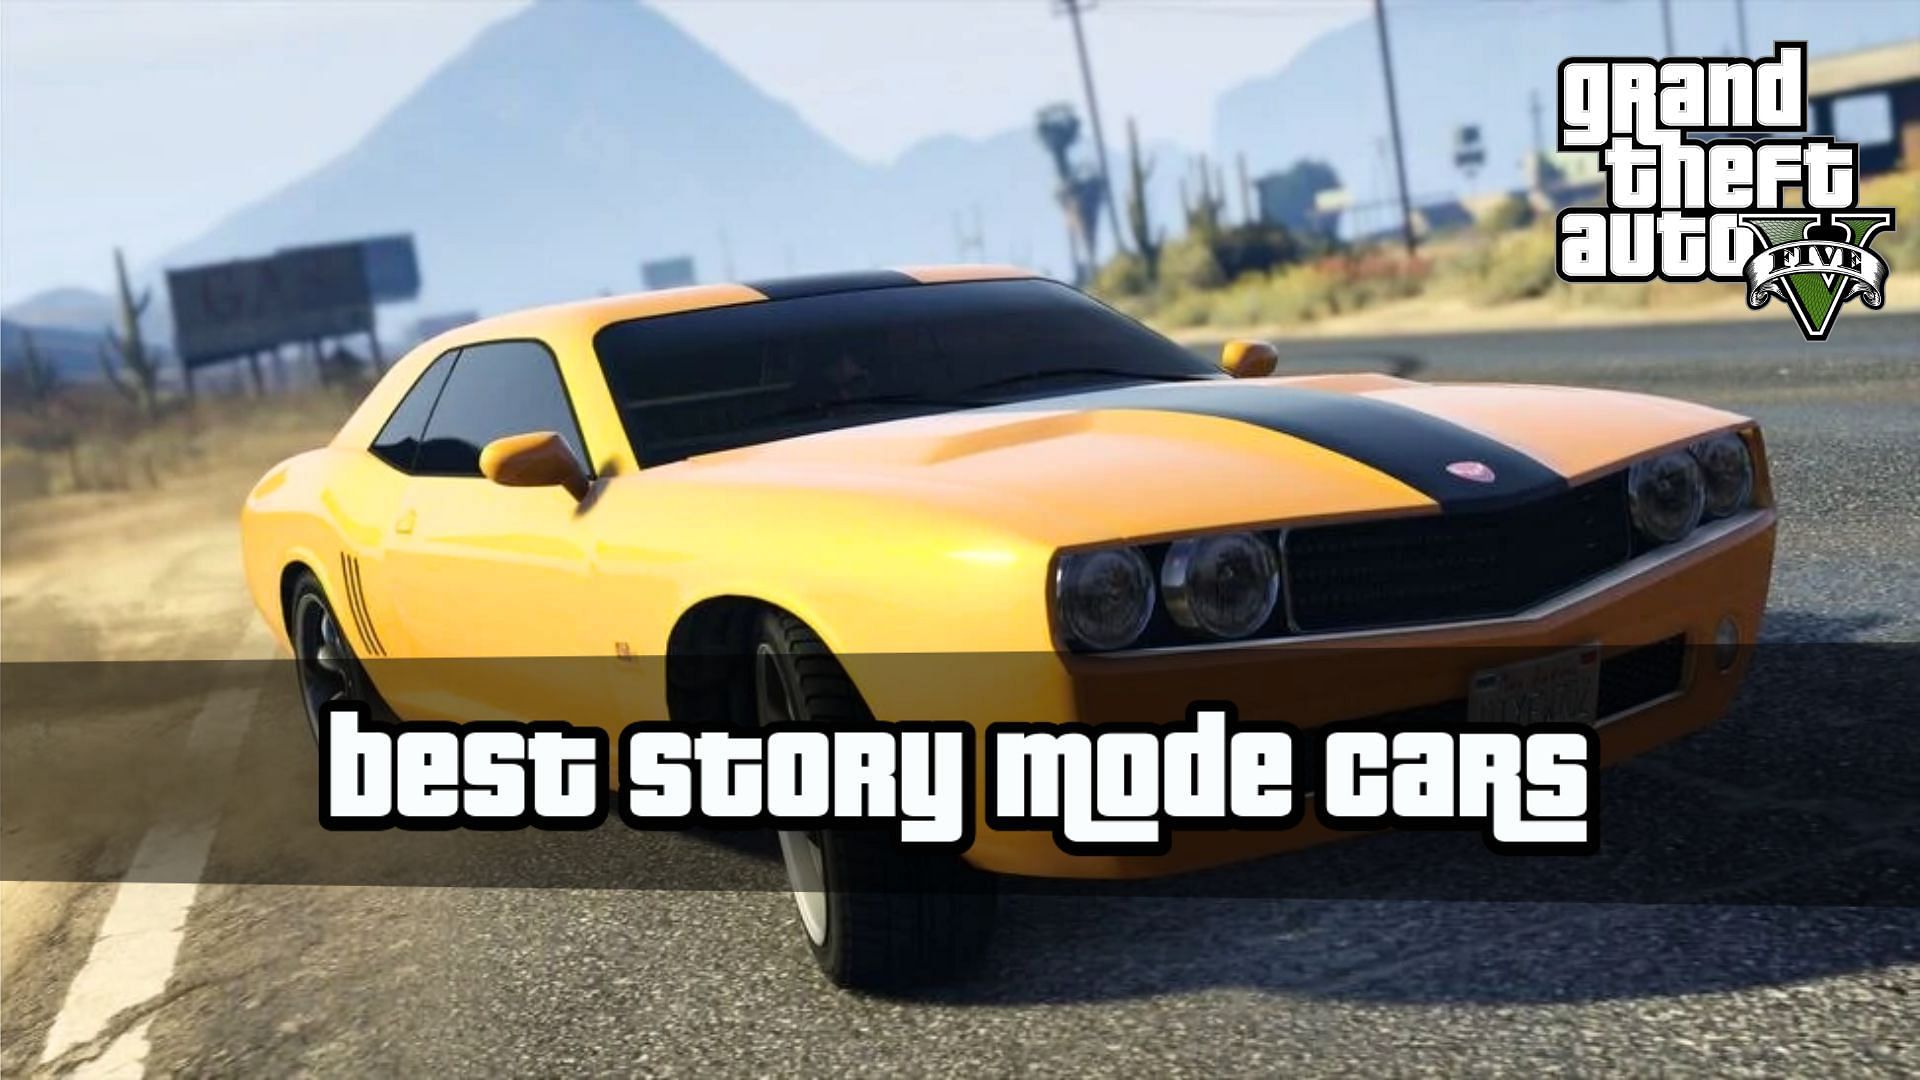 Top 5 Best Mission Mods For GTA 5 Story Mode In 2022